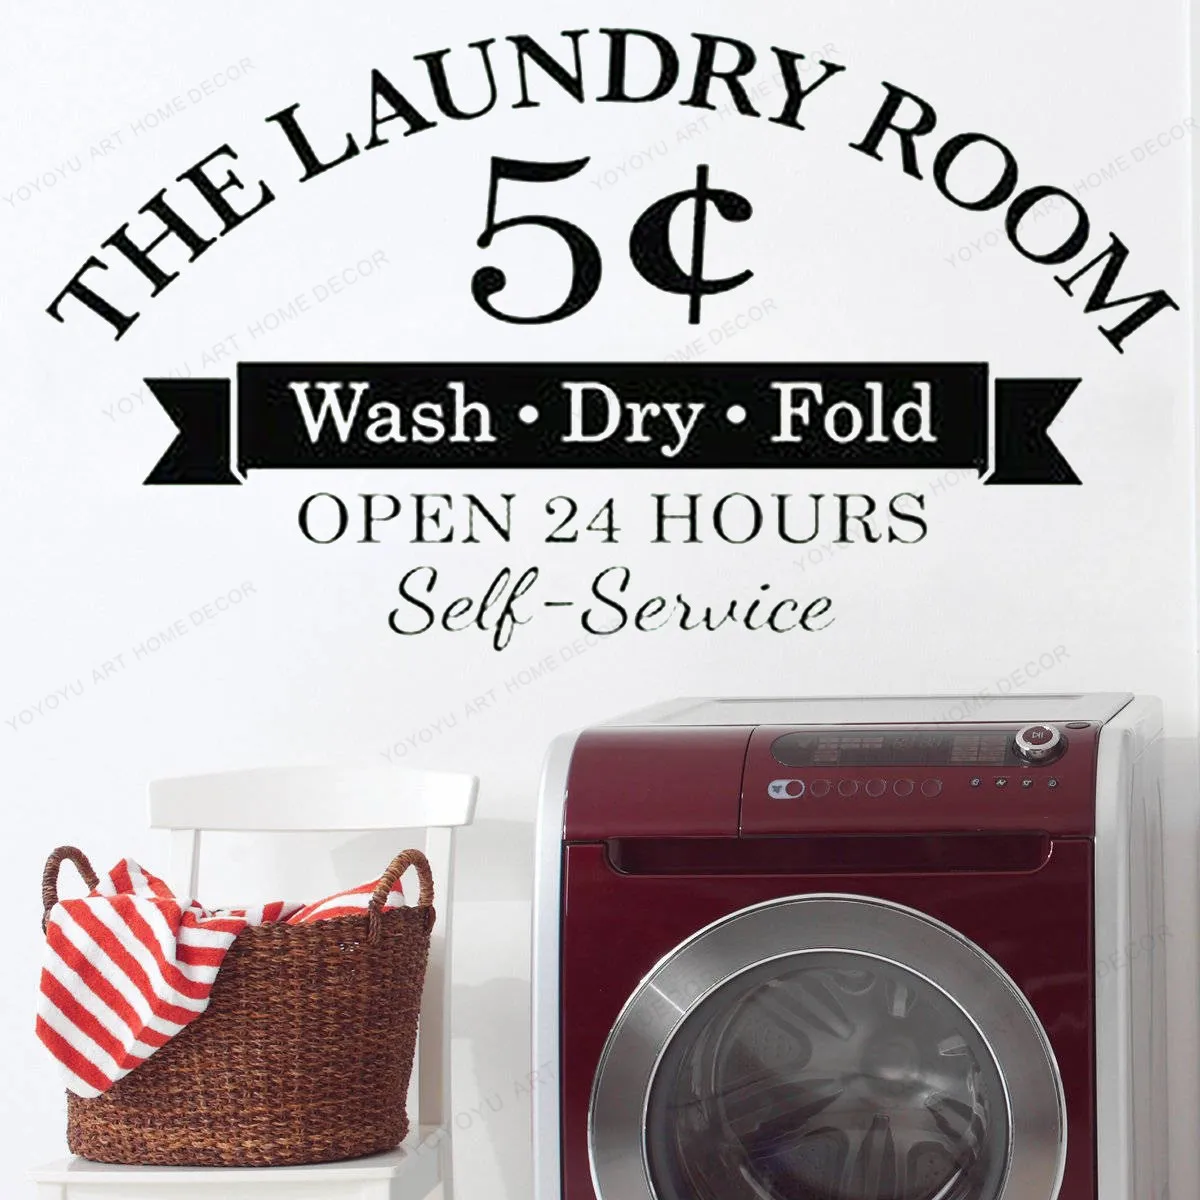 

the Laundry Room wall decal Wash Dry Fold - 5 Cents - Open 24 Hours - Self-Service quote wall sticker vinyl HJ744